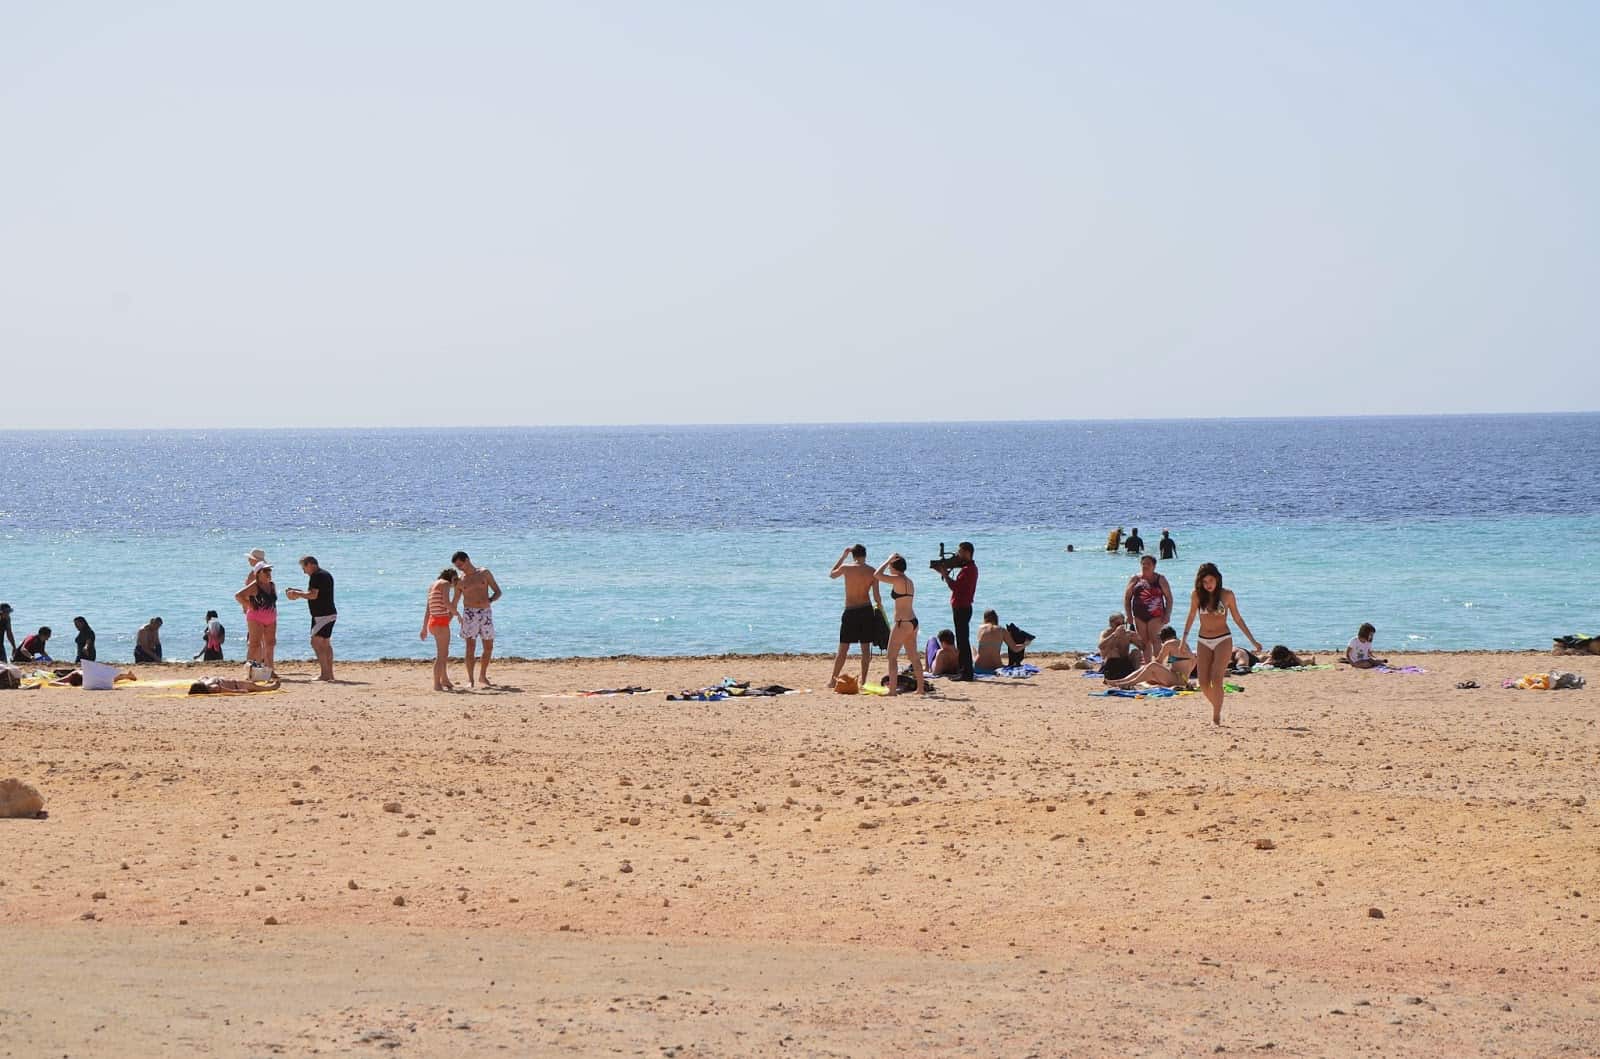 The second beach where we snorkeled at Ras Mohammad National Park in Sinai, Egypt